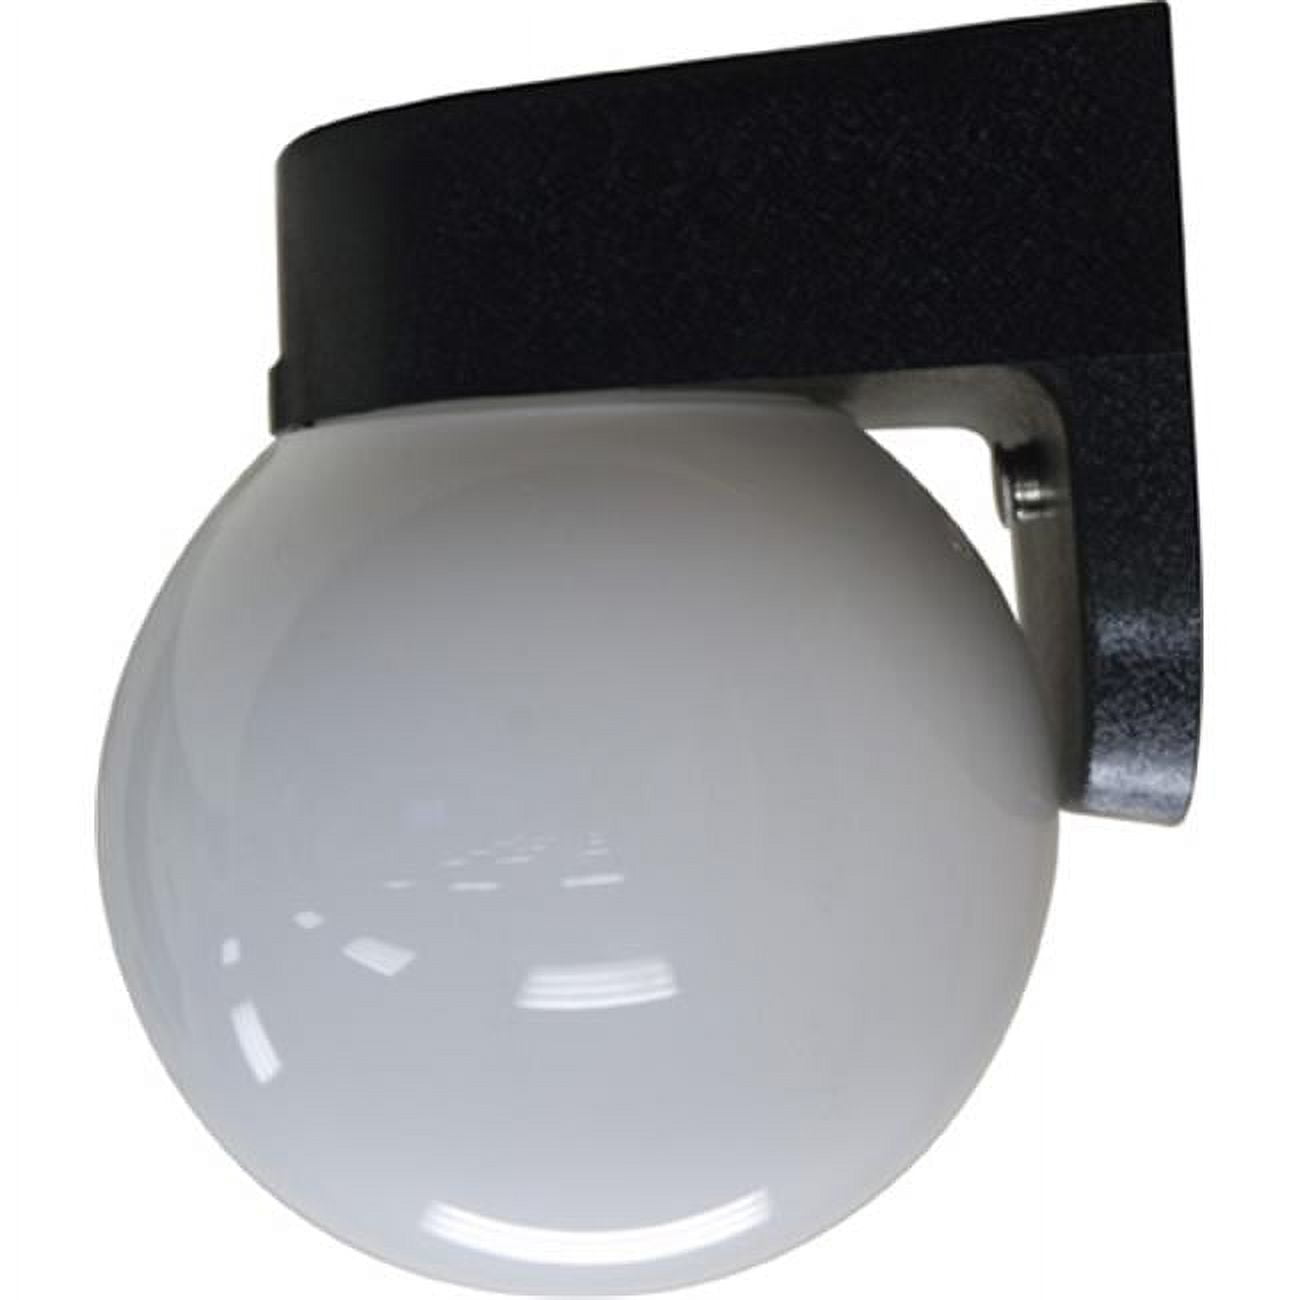 W2200-b 7.25 X 5.88 X 5.63 In. 120 V 60 Watts Incandenscent Type Polycarbonate Surface Mounted Wall Fixture Light, Black